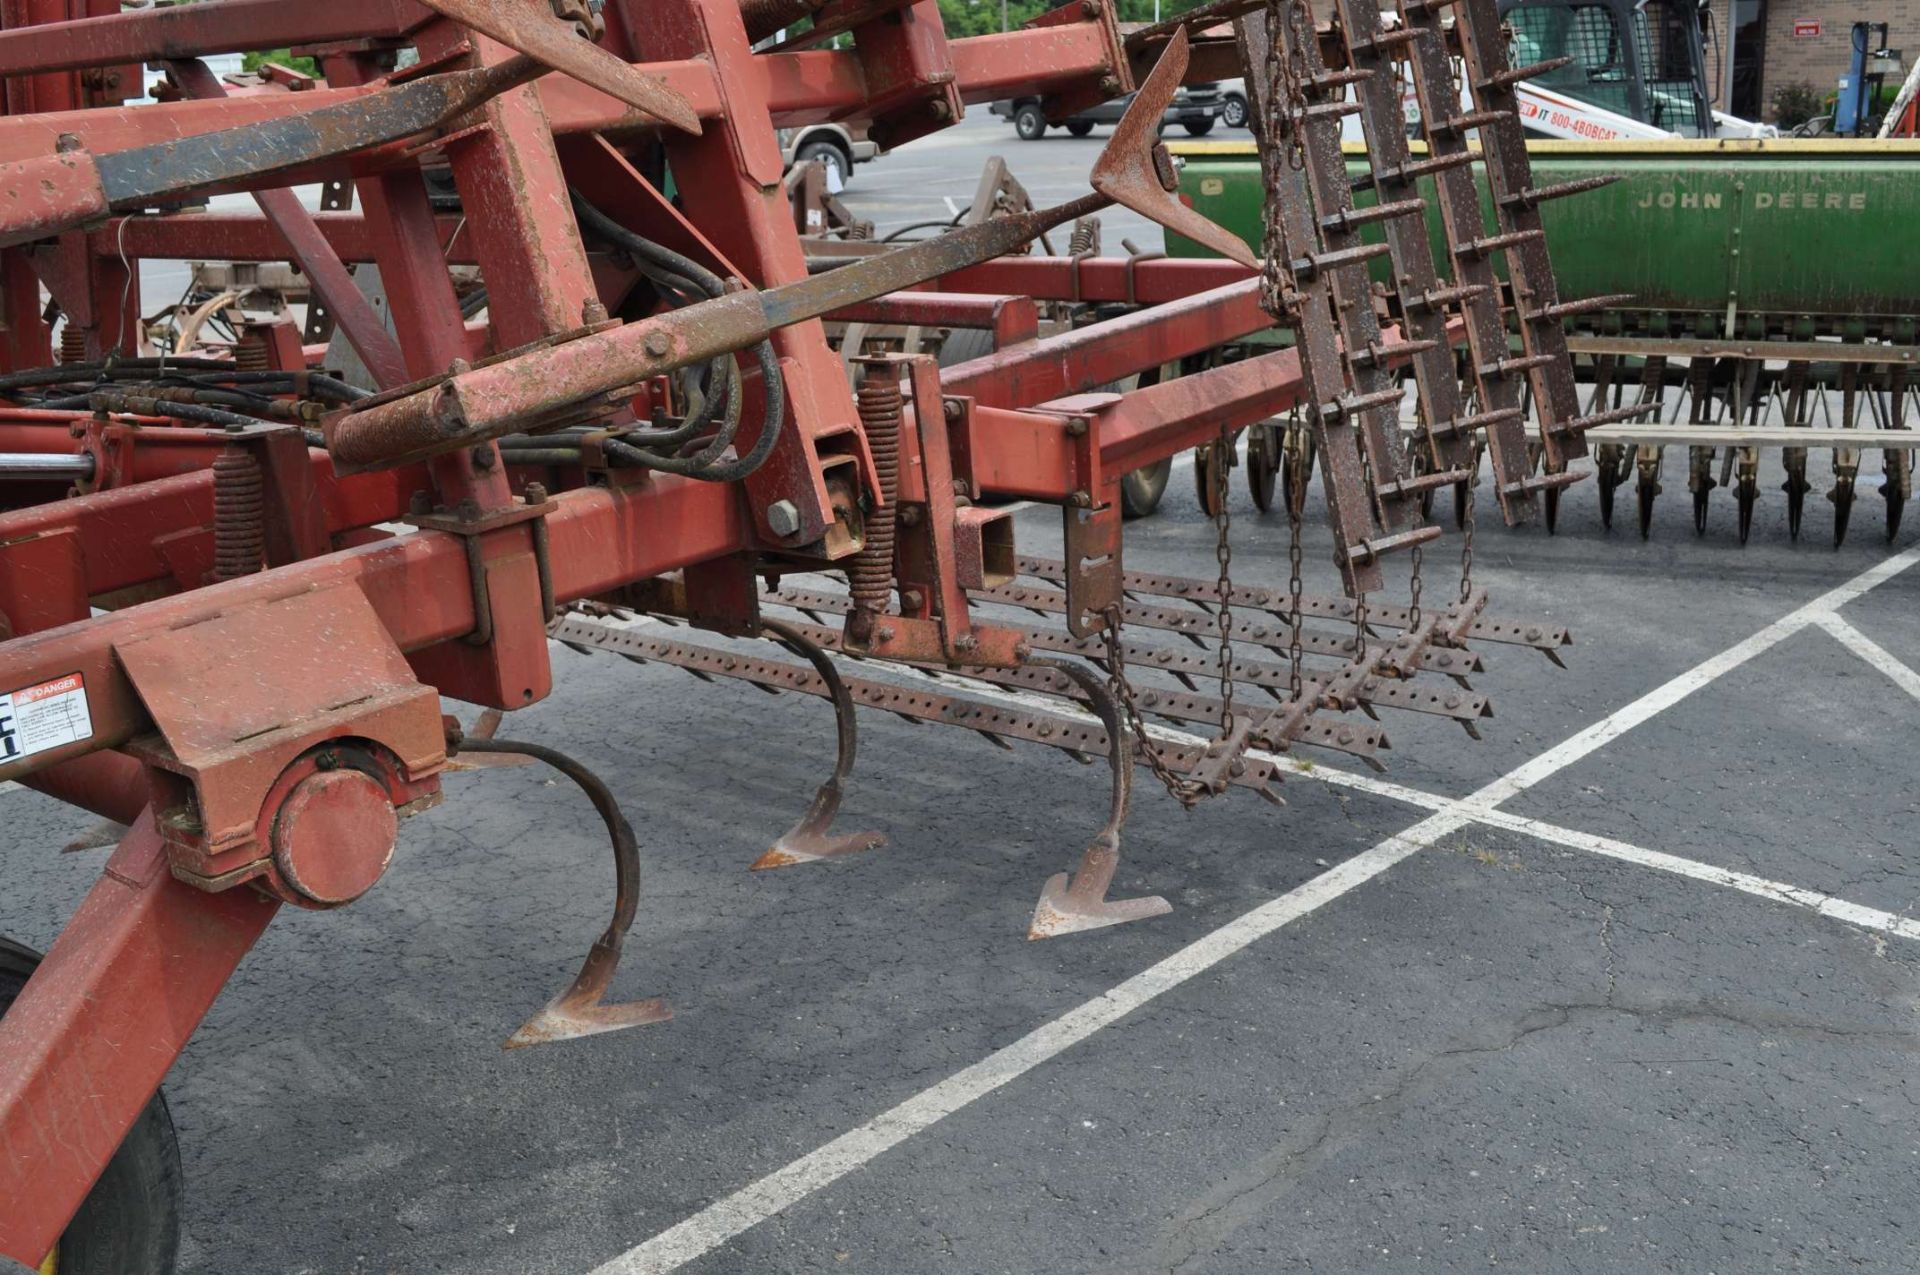 26' Sunflower 6332 soil finisher, front disk w/ reel, sweeps, 5 bar spike tooth harrow - Image 7 of 7